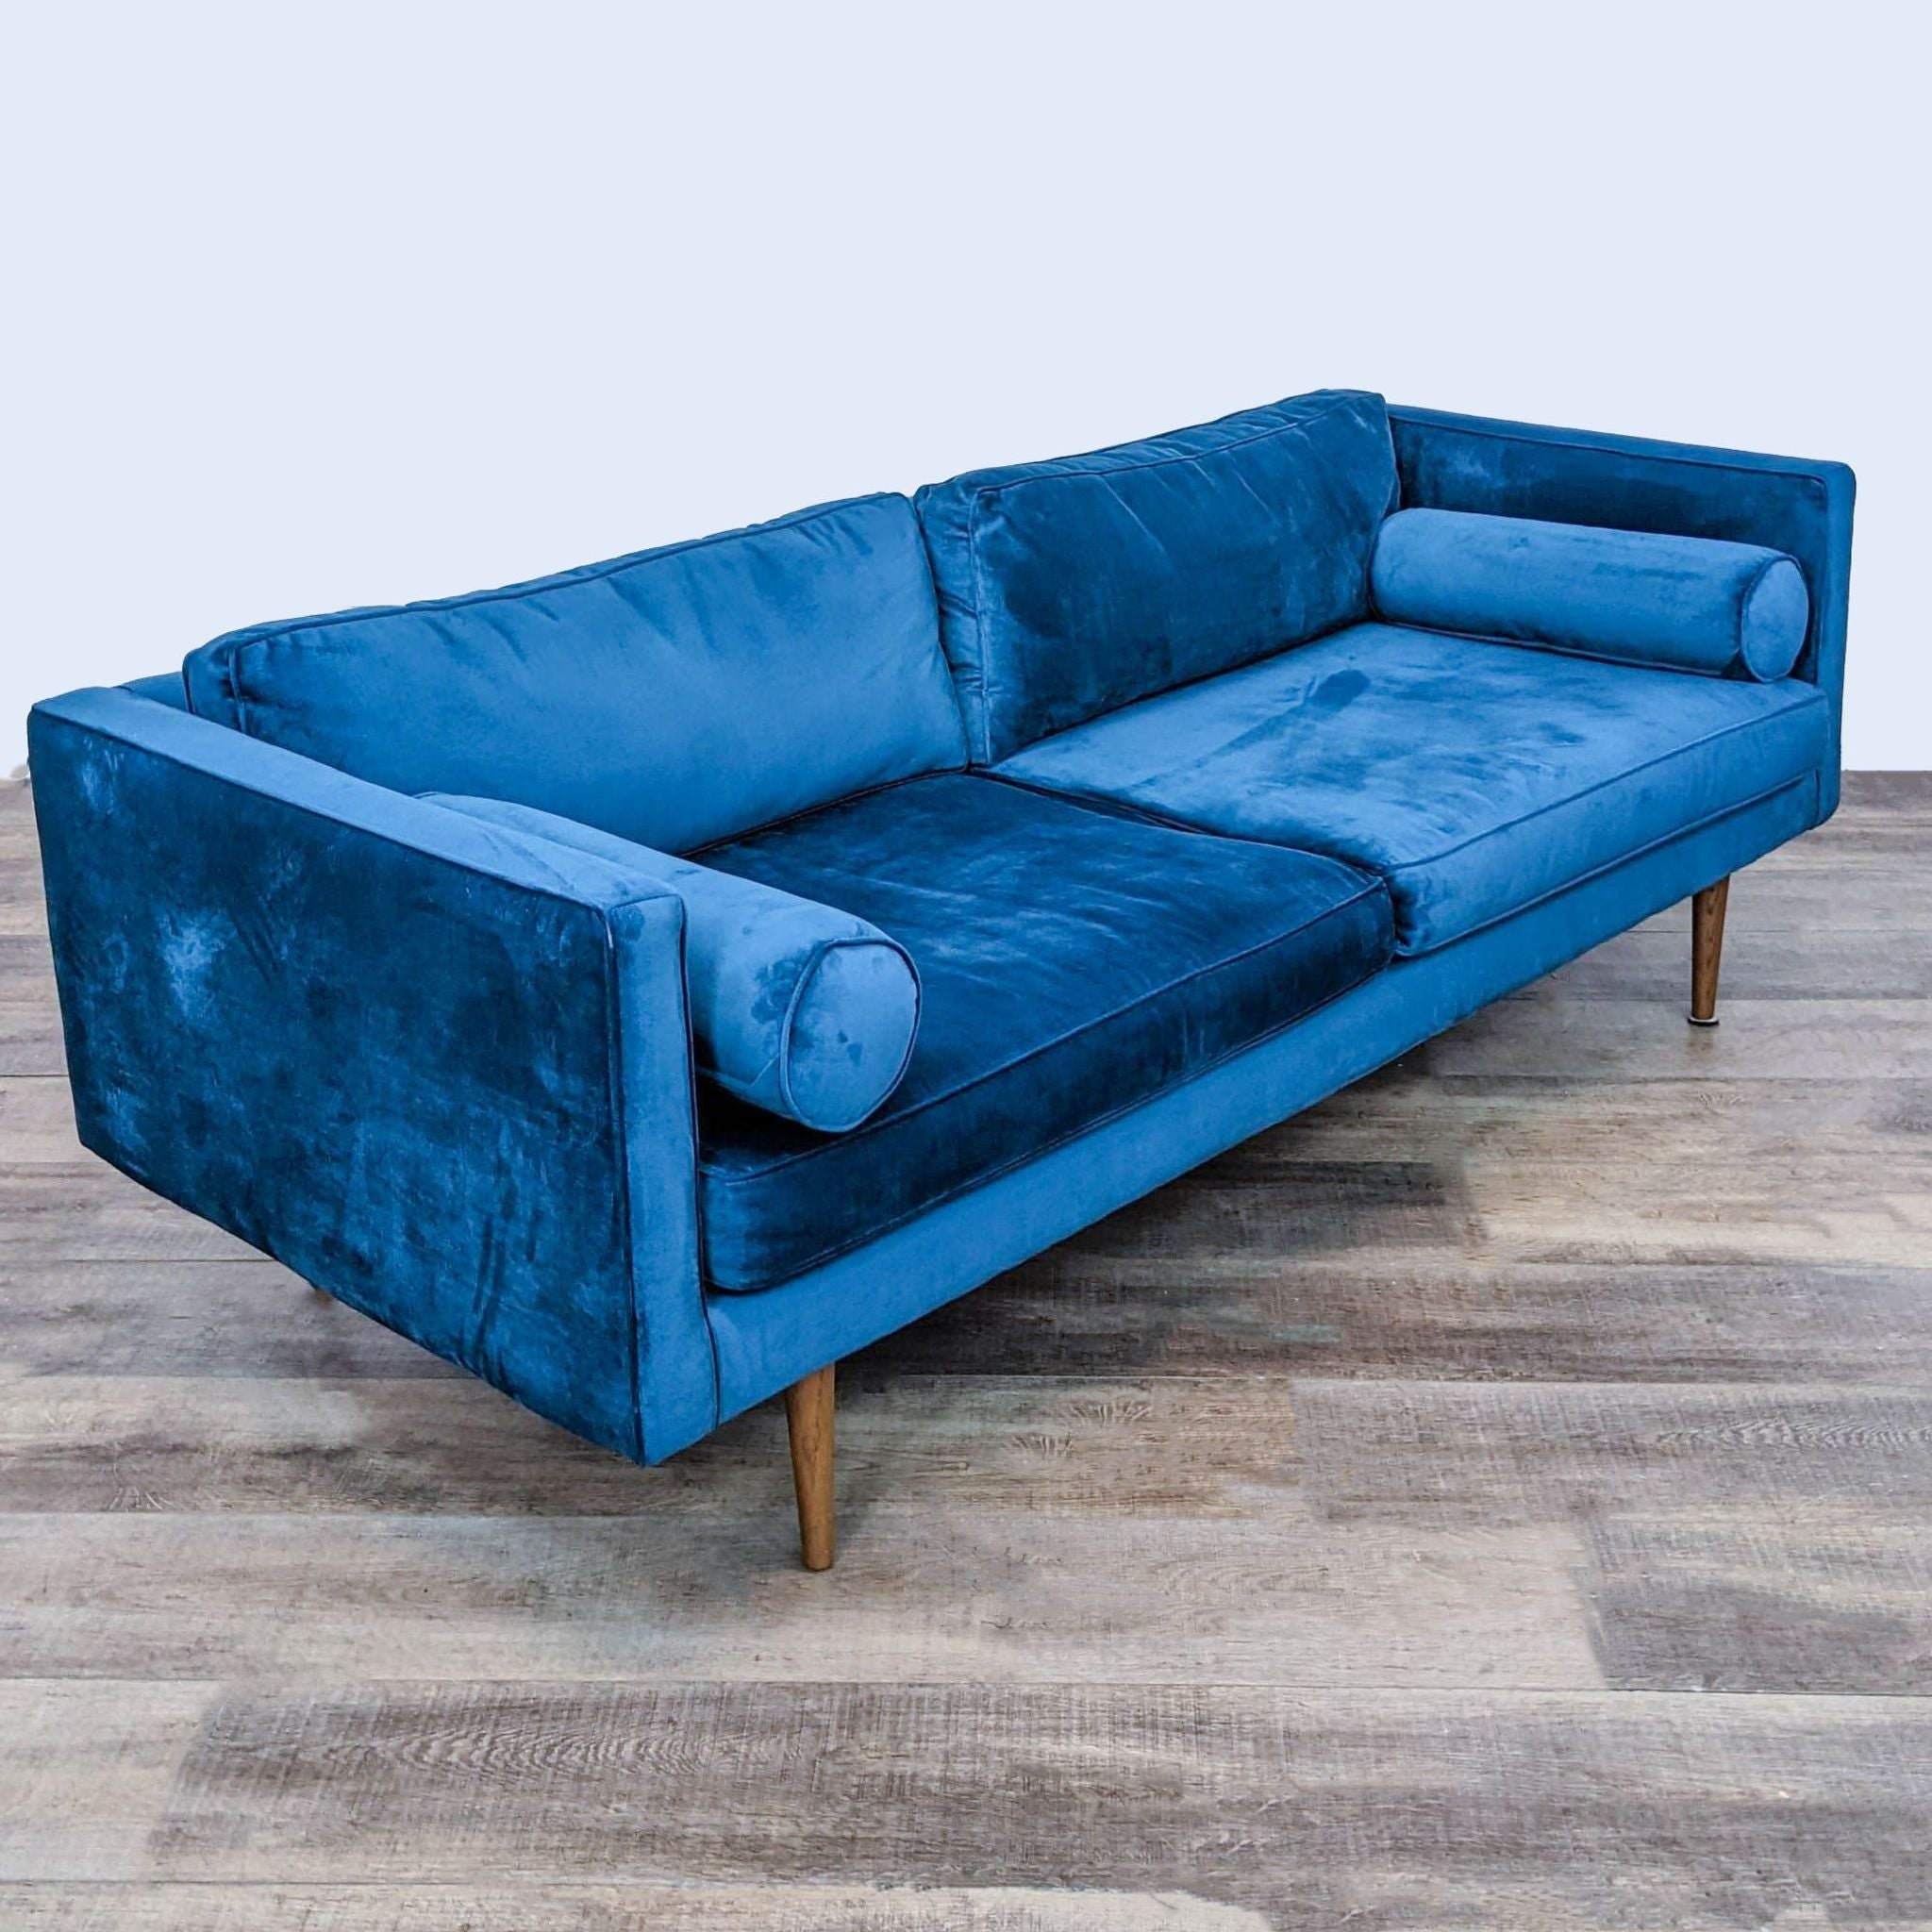 2. Front angled view of a glamorous West Elm blue velvet sofa with clean modern styling and bolster pillows.